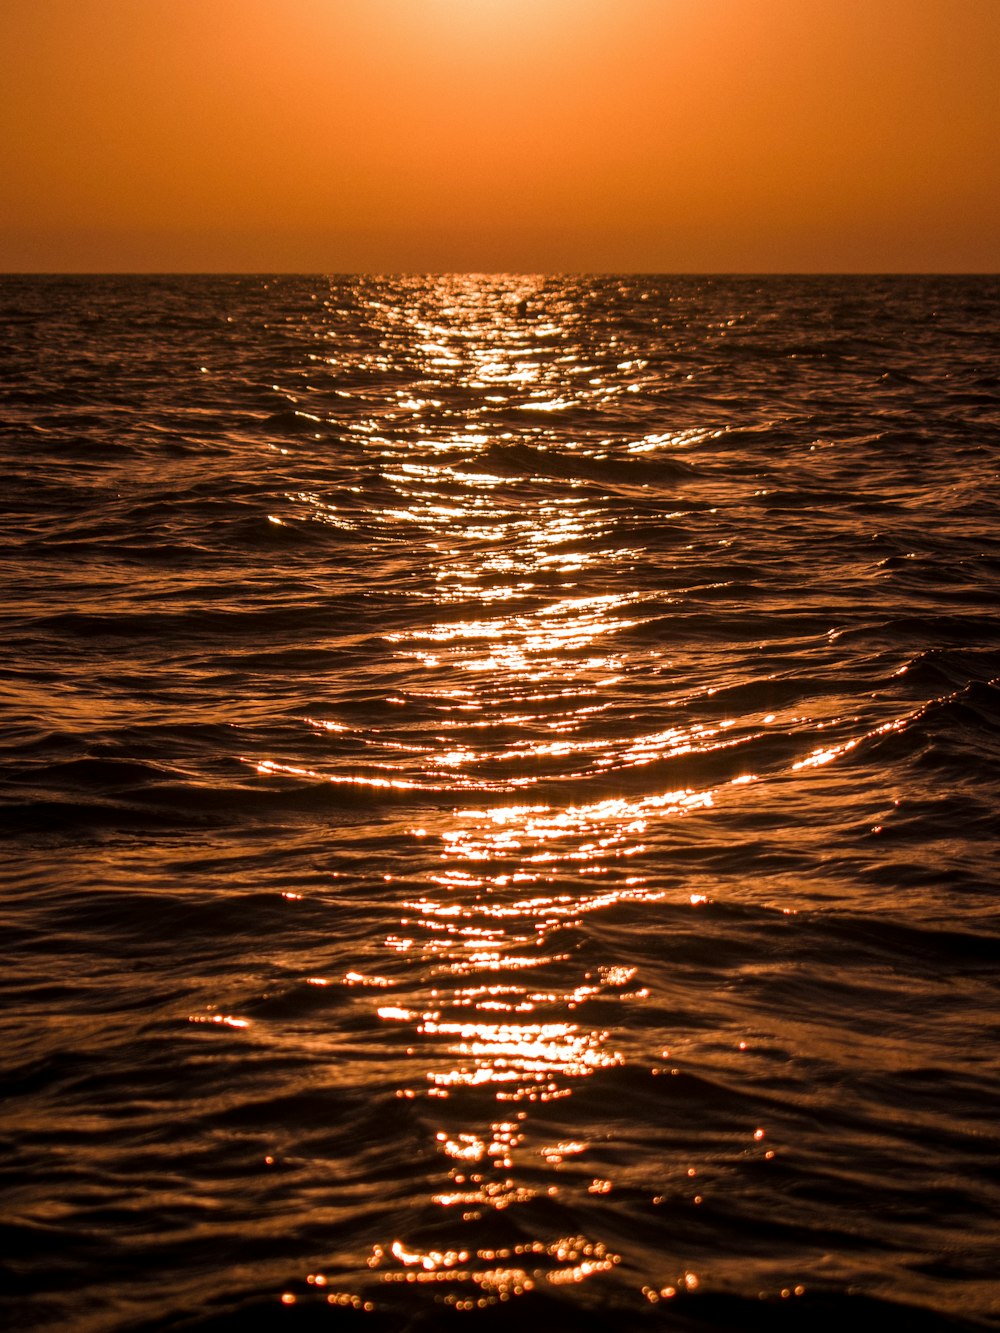 the sun is setting over the ocean water